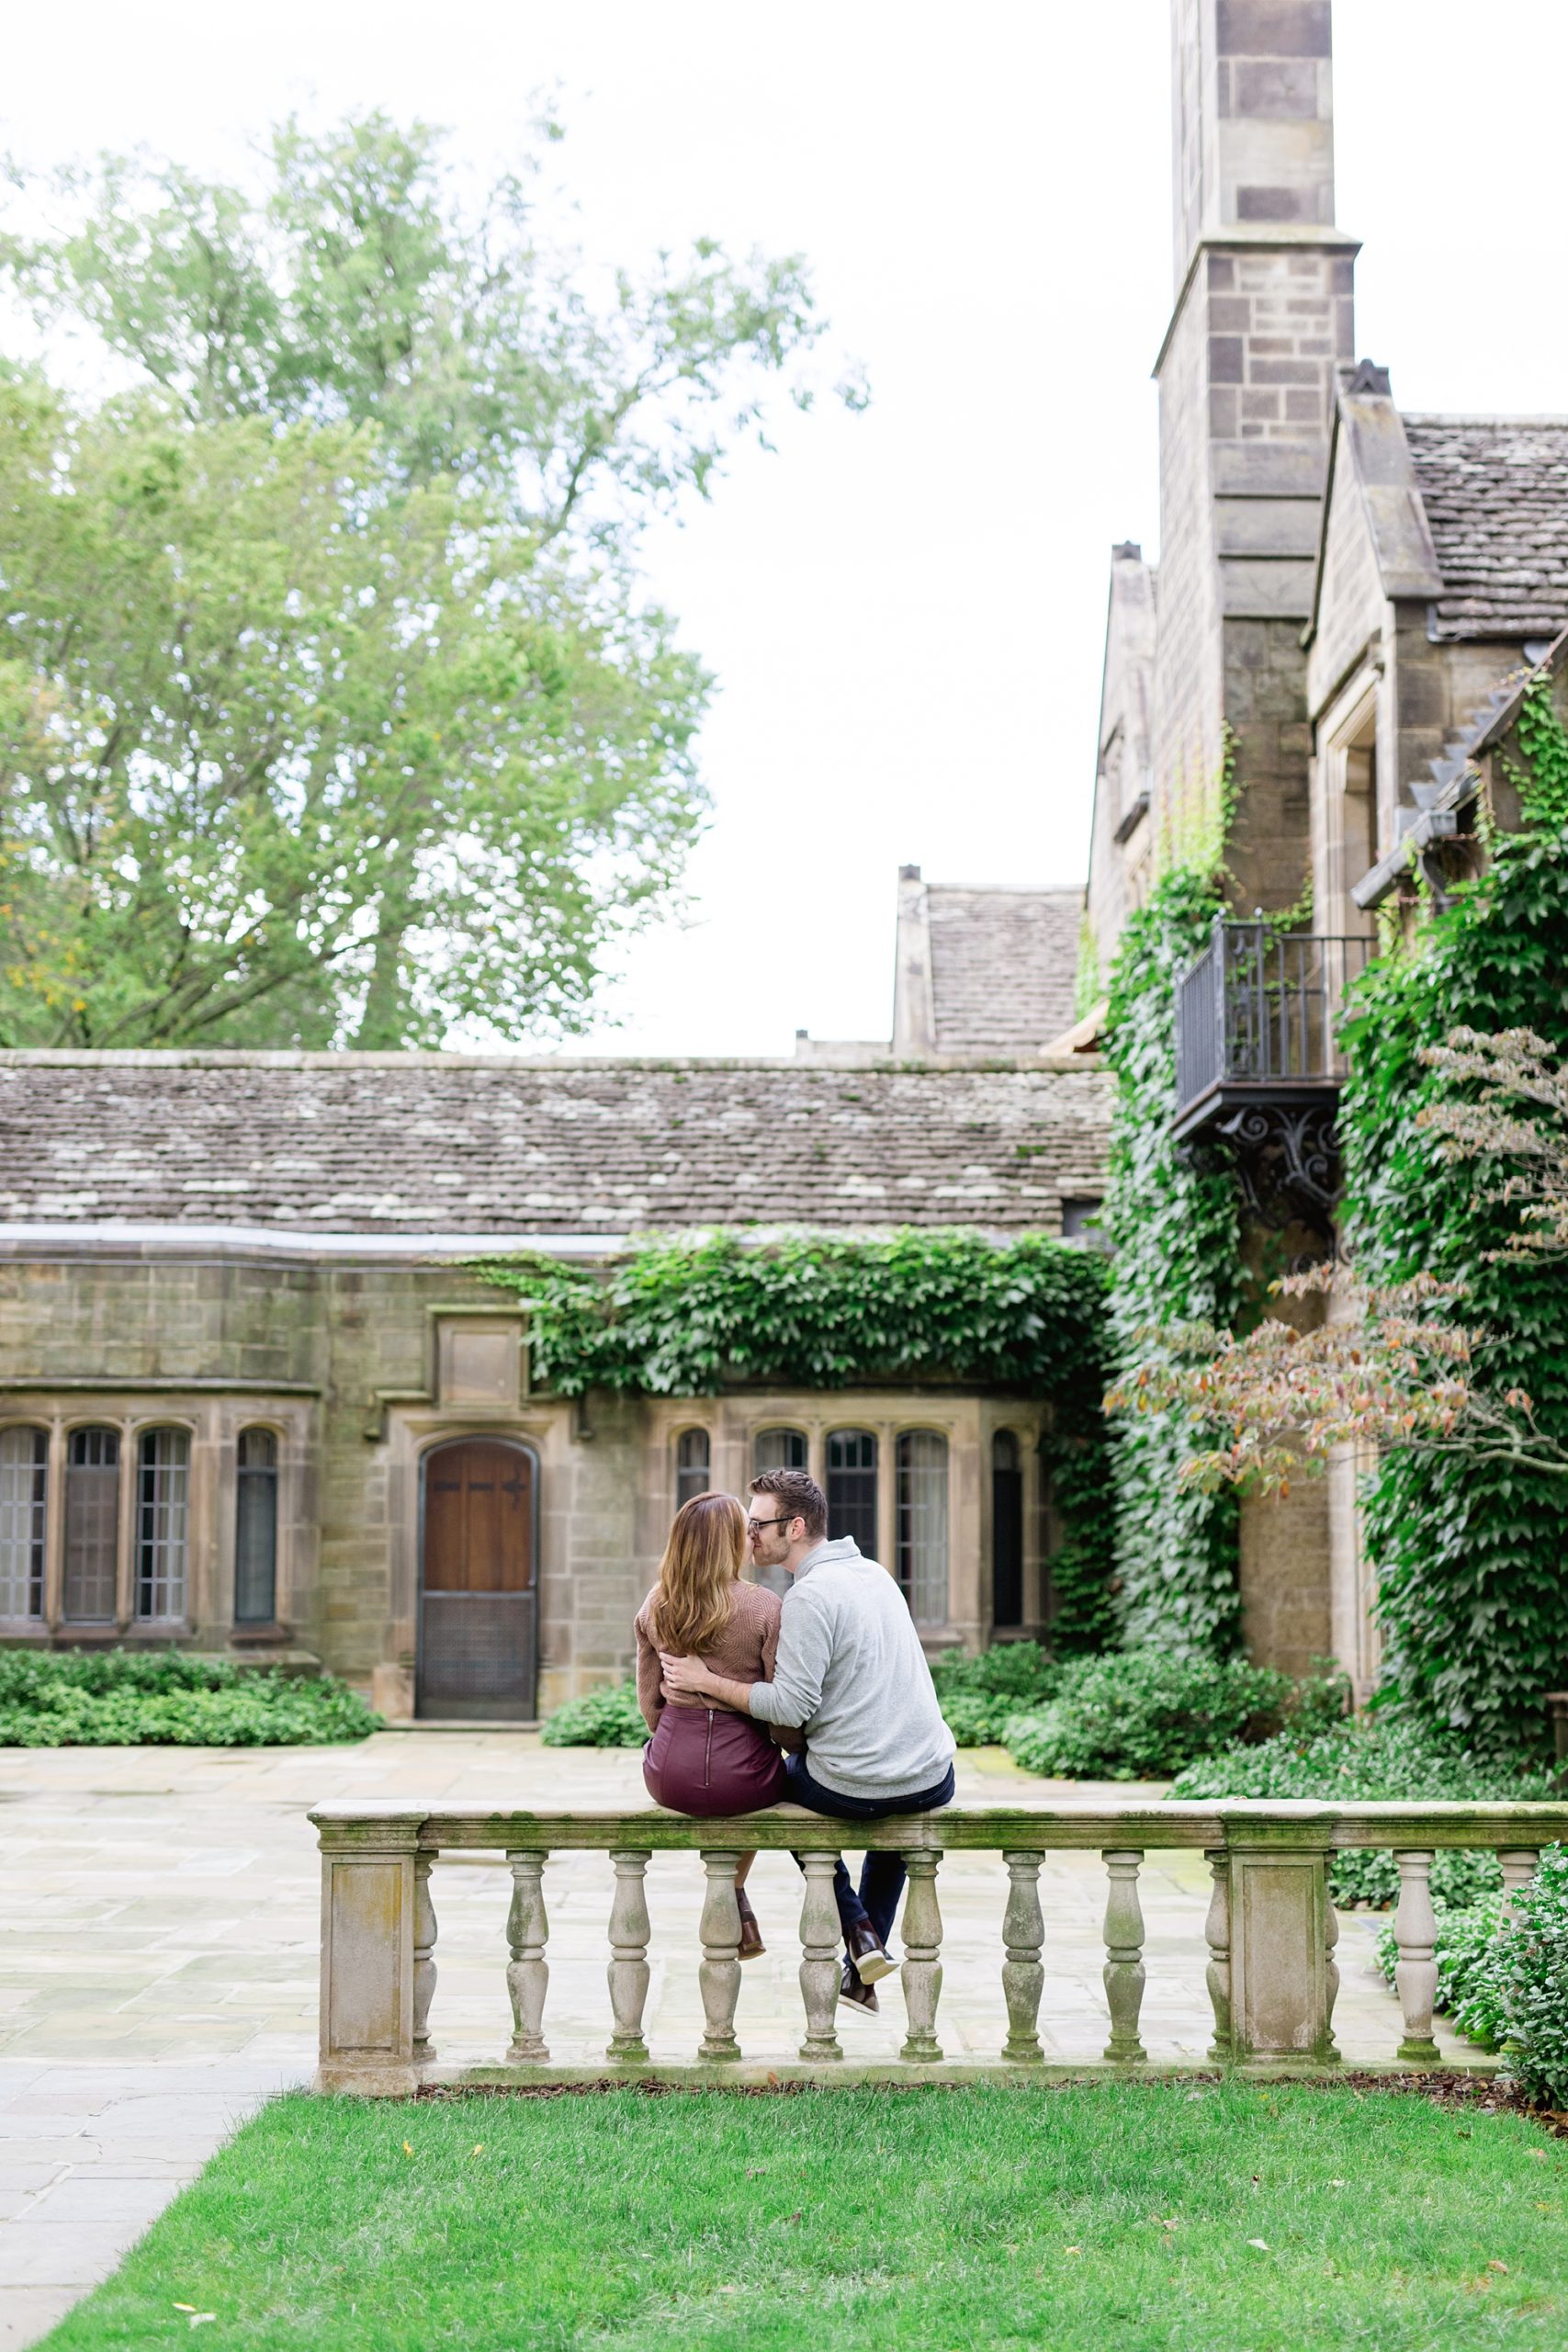 Ford House Engagement Shoot in Grosse Pointe Michigan by Breanne Rochelle Photography